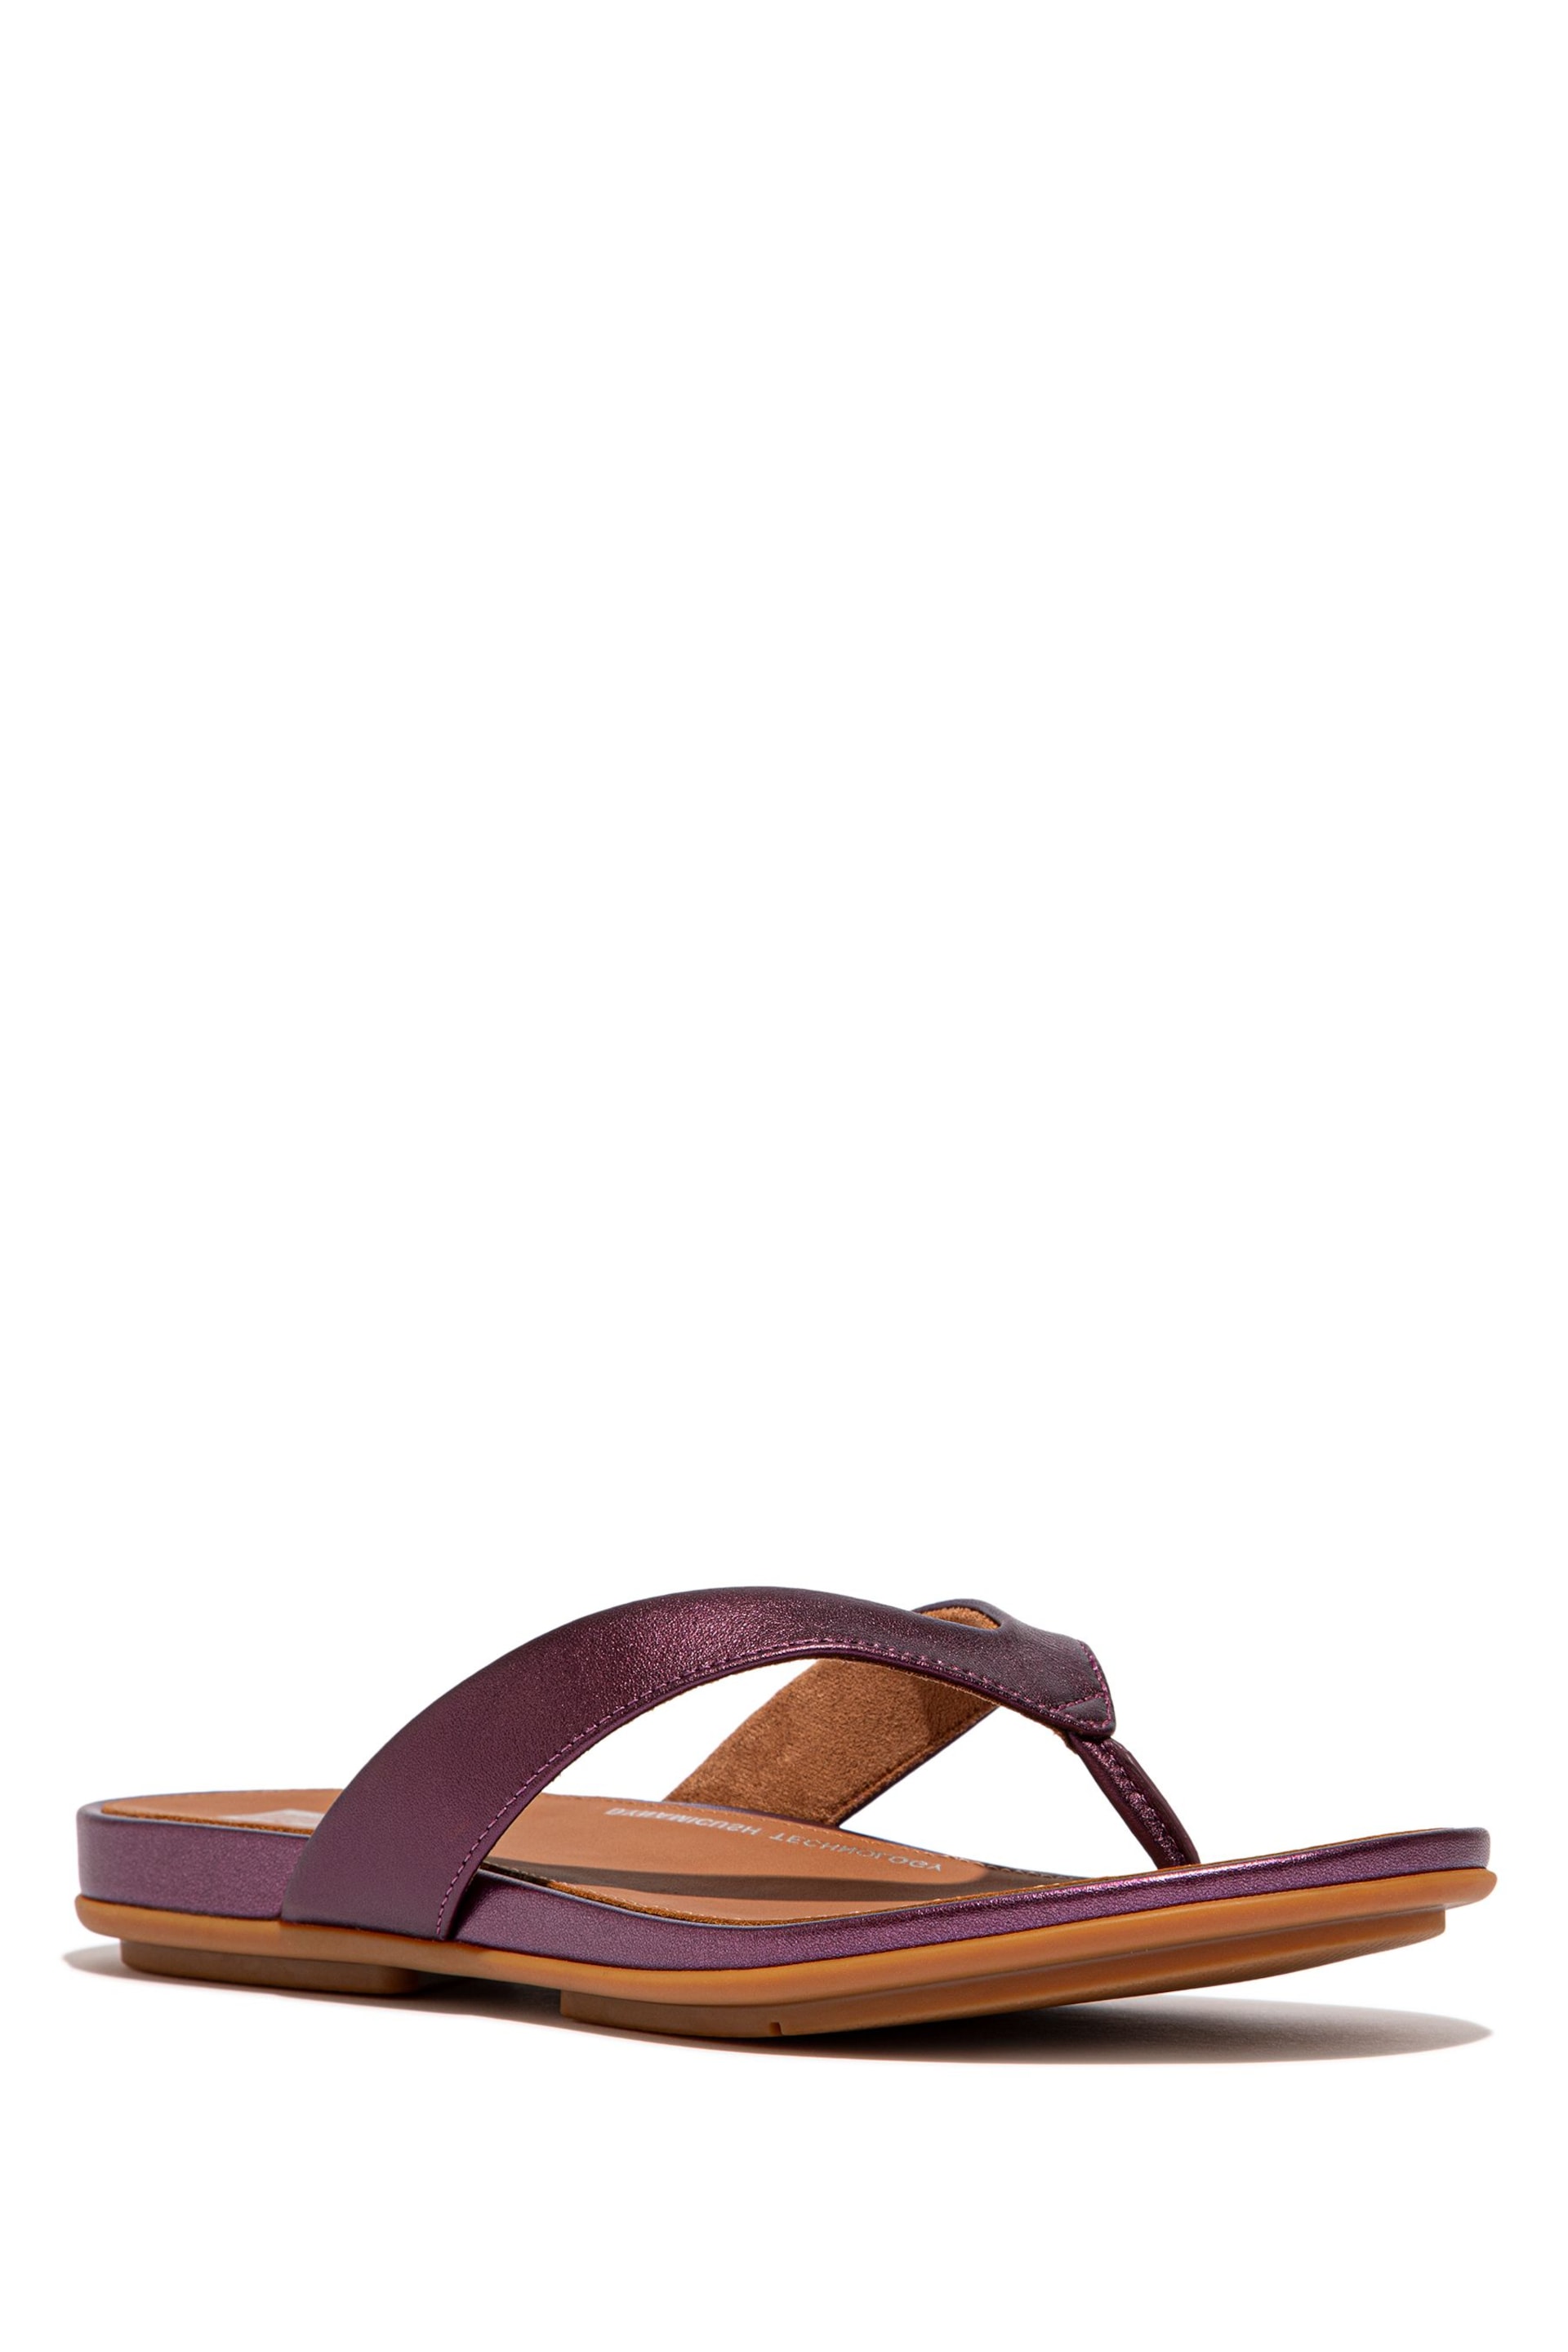 FitFlop Red Gracie Metallic Leather Flip Flops - Image 1 of 3